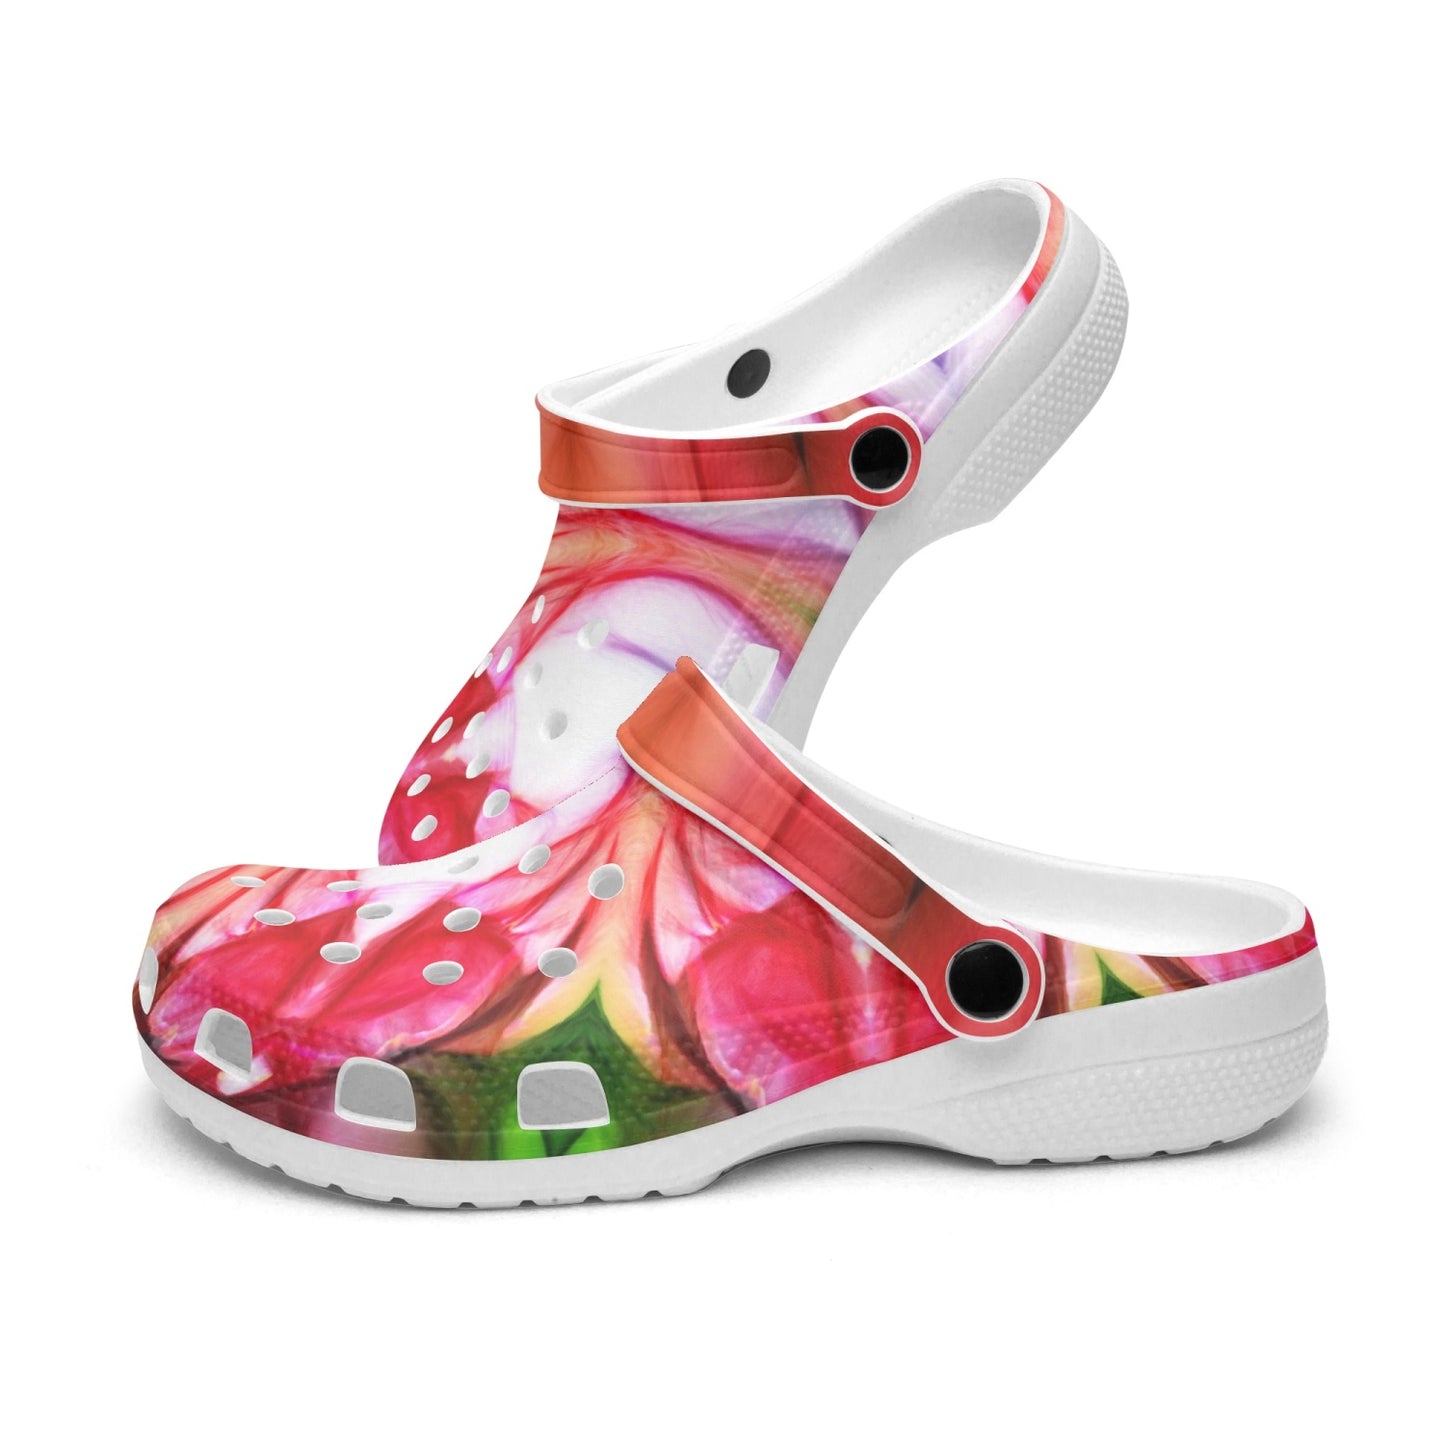 Peachy pink Flower Kaleidoscope 413. All Over Printed Clogs